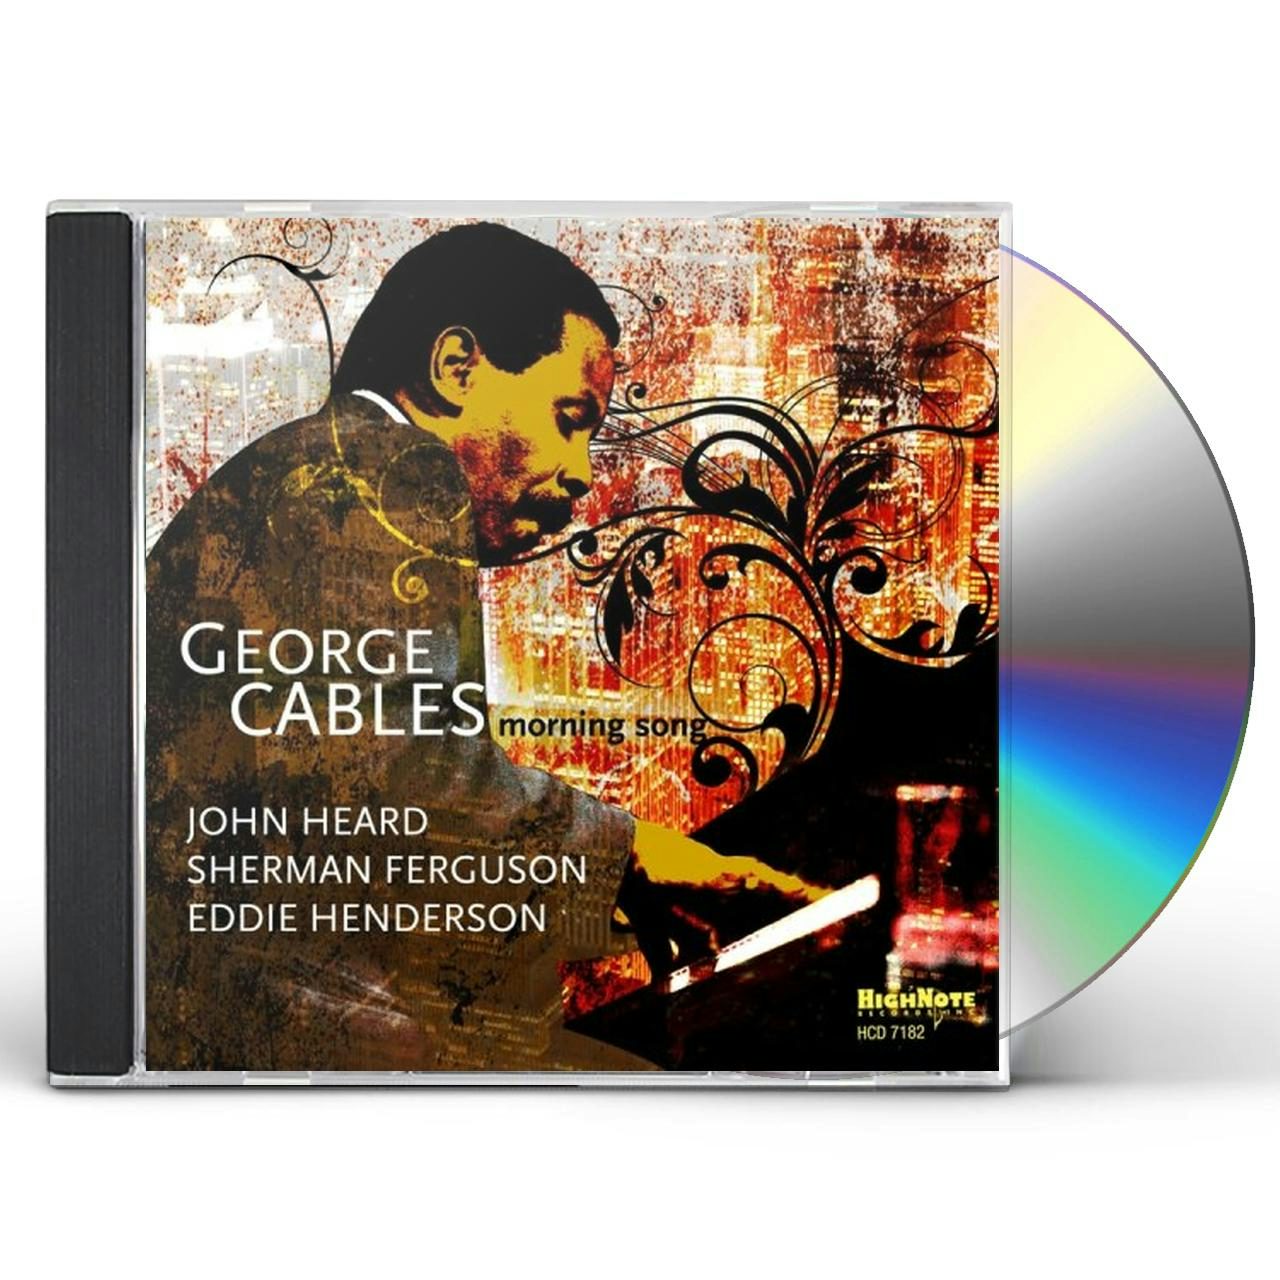 George Cables - cocktail hour cd